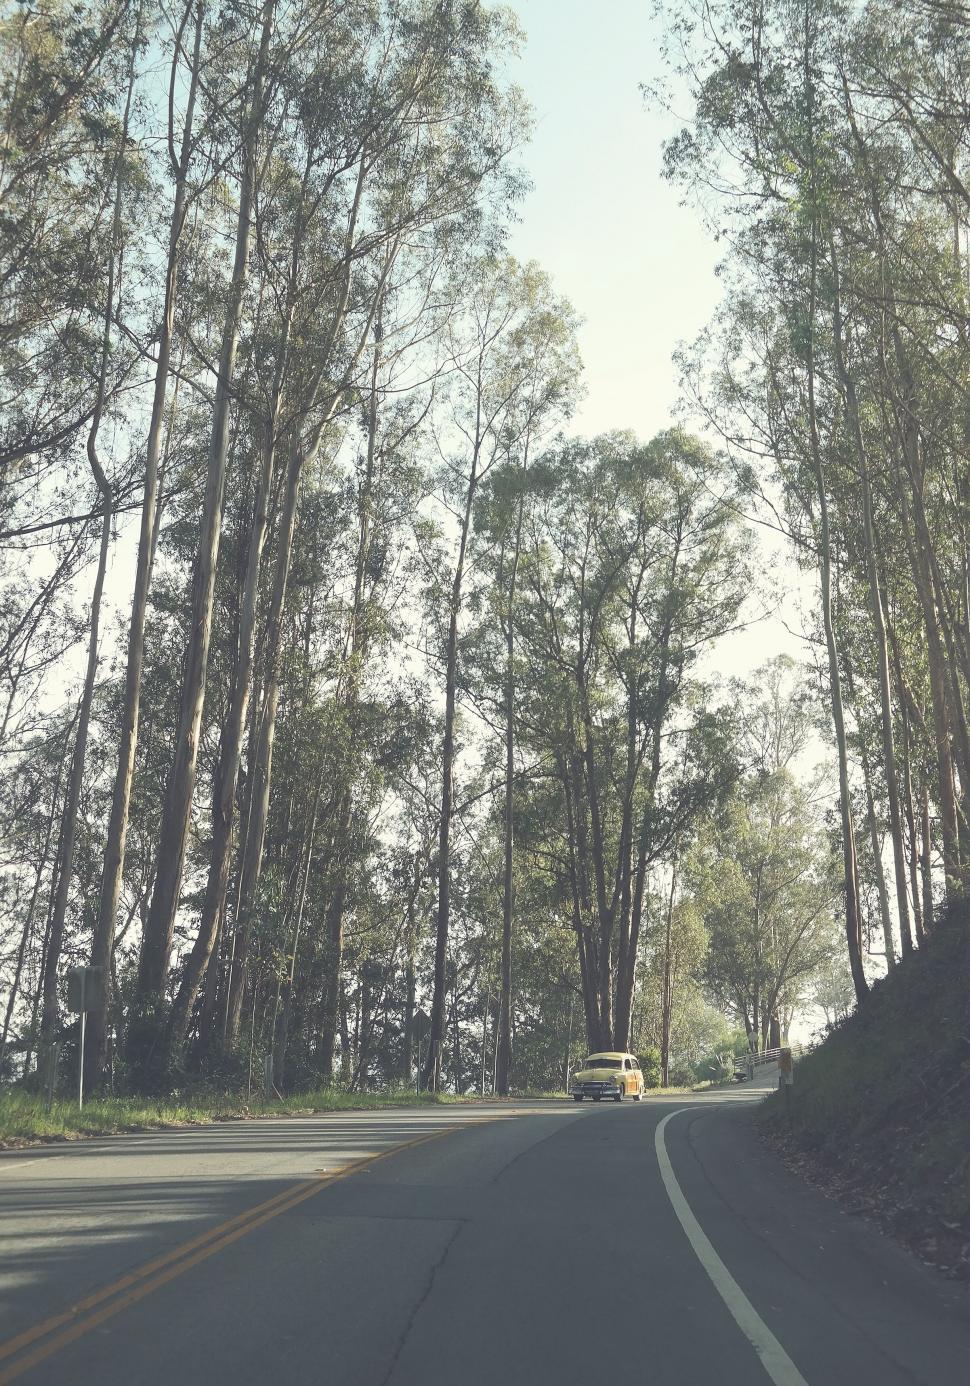 Free Image of A car driving on a road with trees in the background 